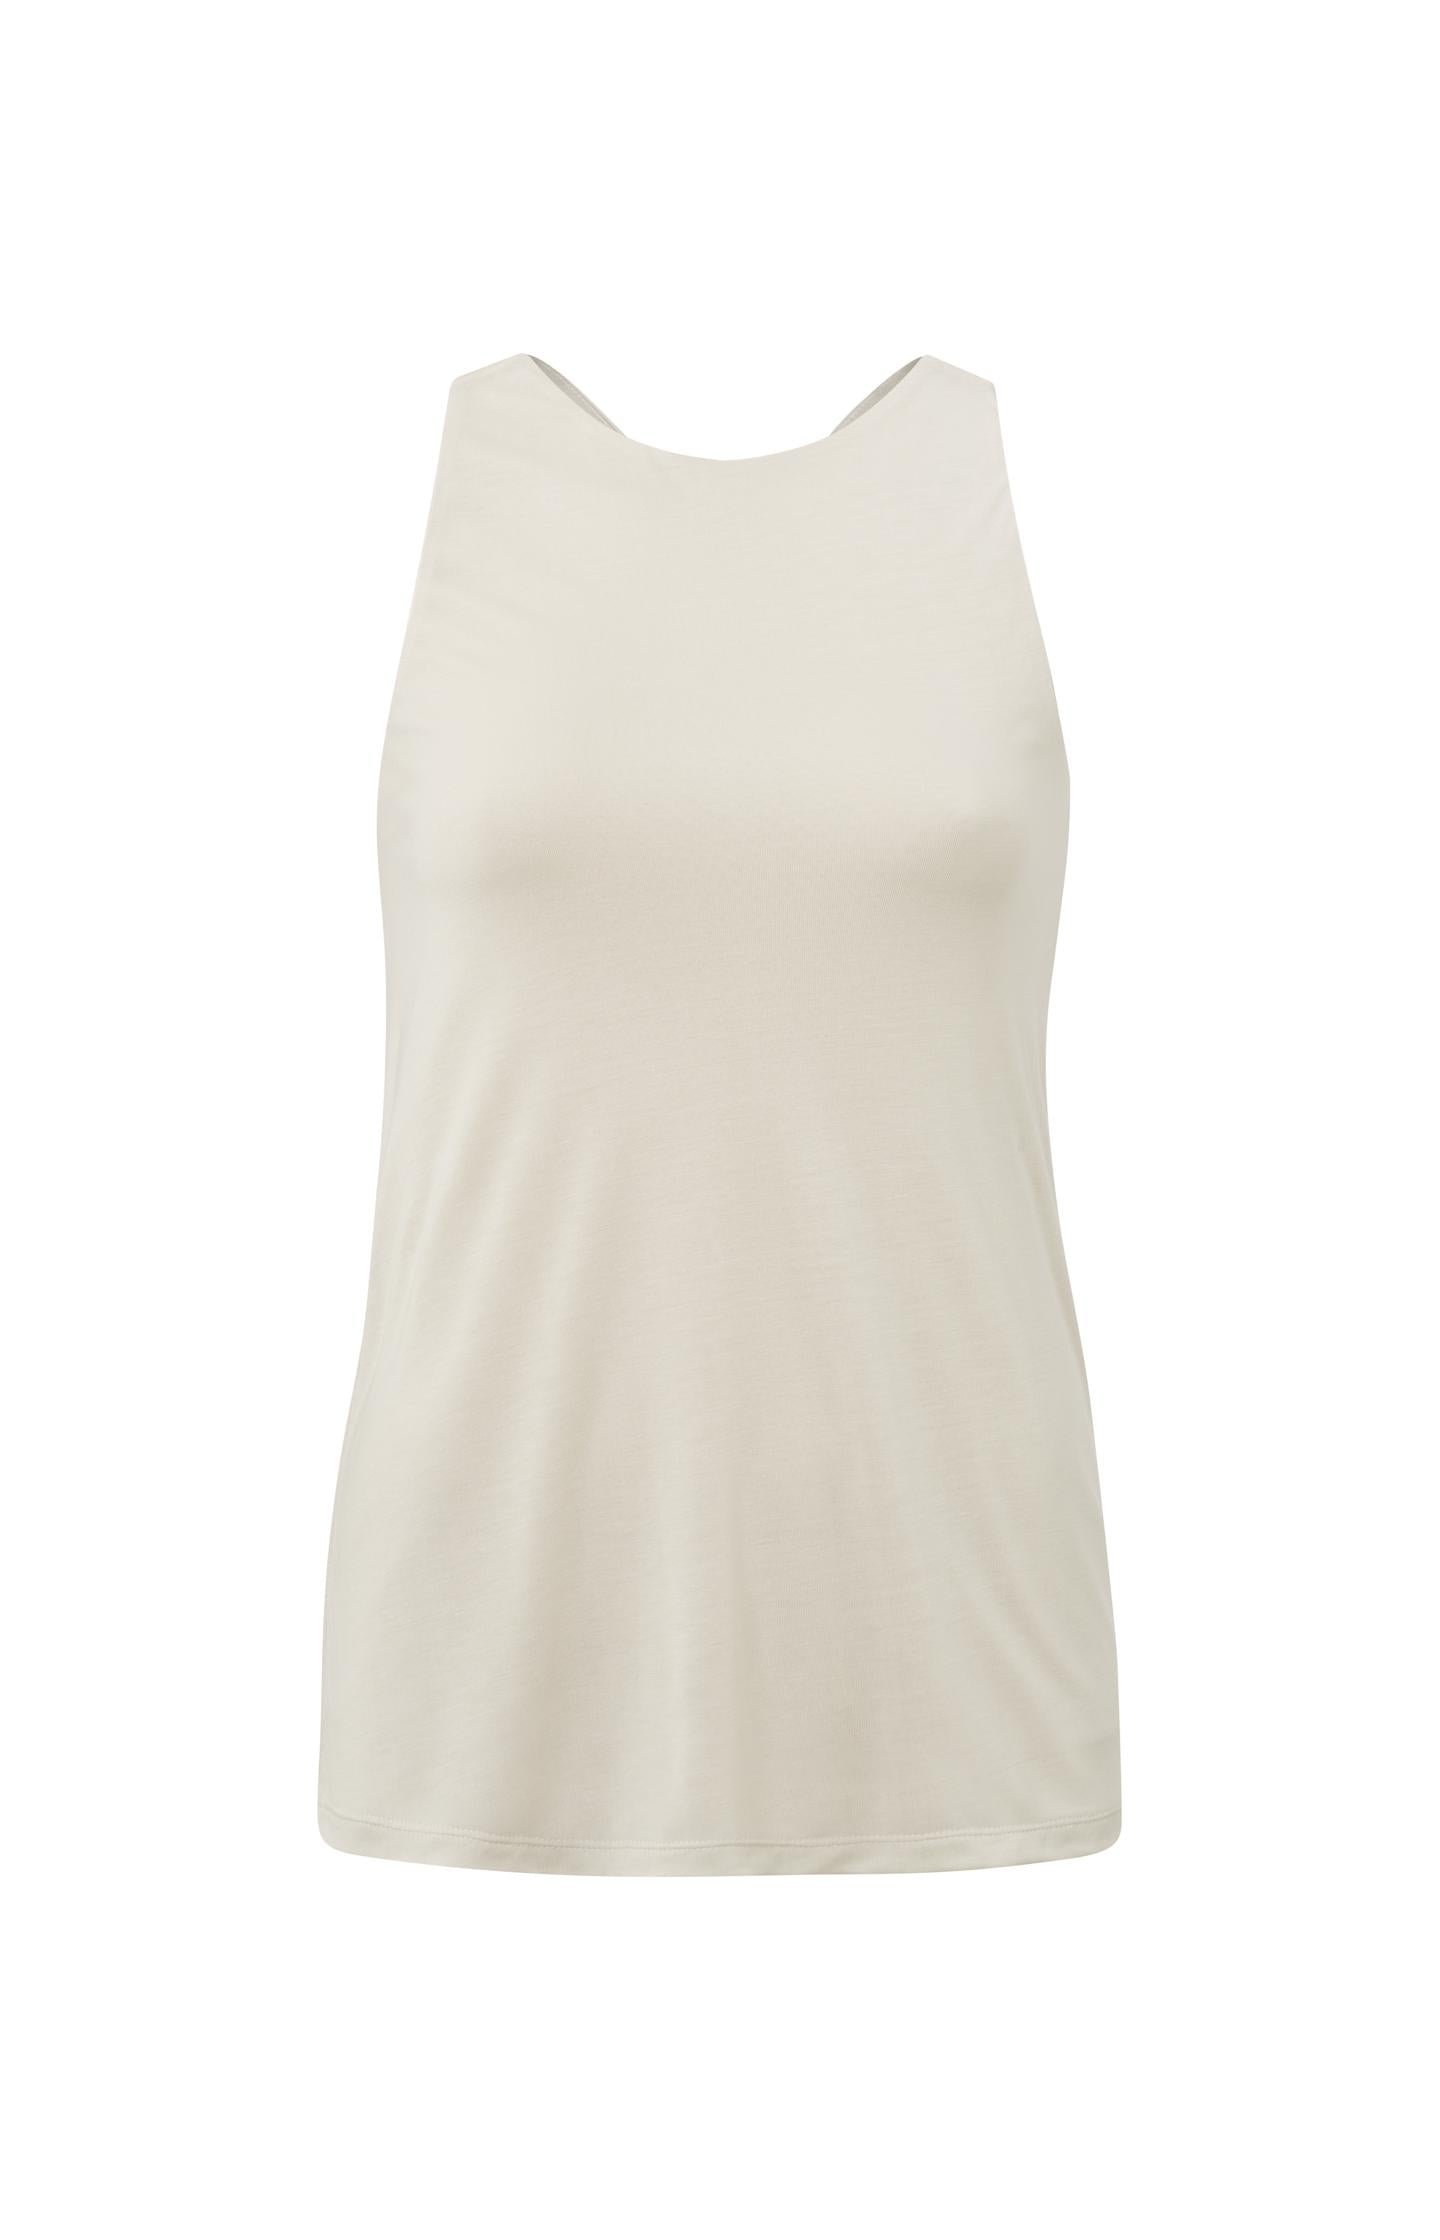 Singlet with round neck and crossed straps on back - Type: product